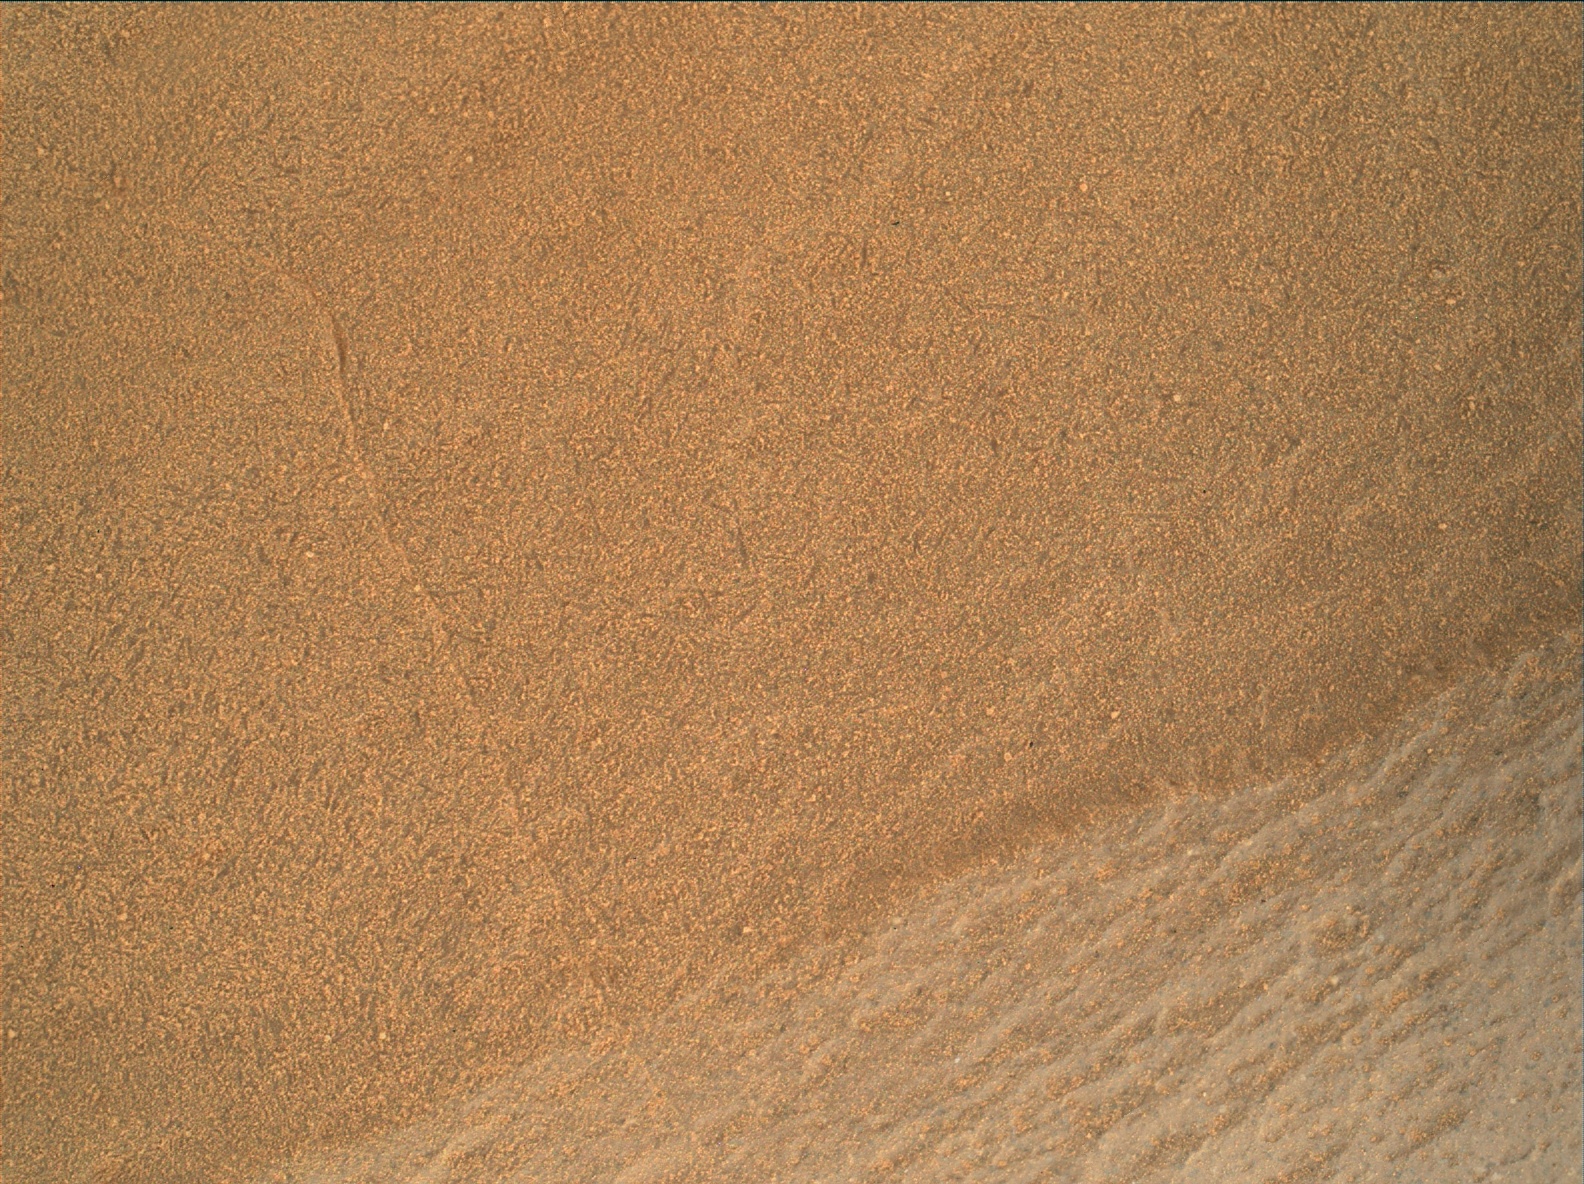 Nasa's Mars rover Curiosity acquired this image using its Mars Hand Lens Imager (MAHLI) on Sol 1686